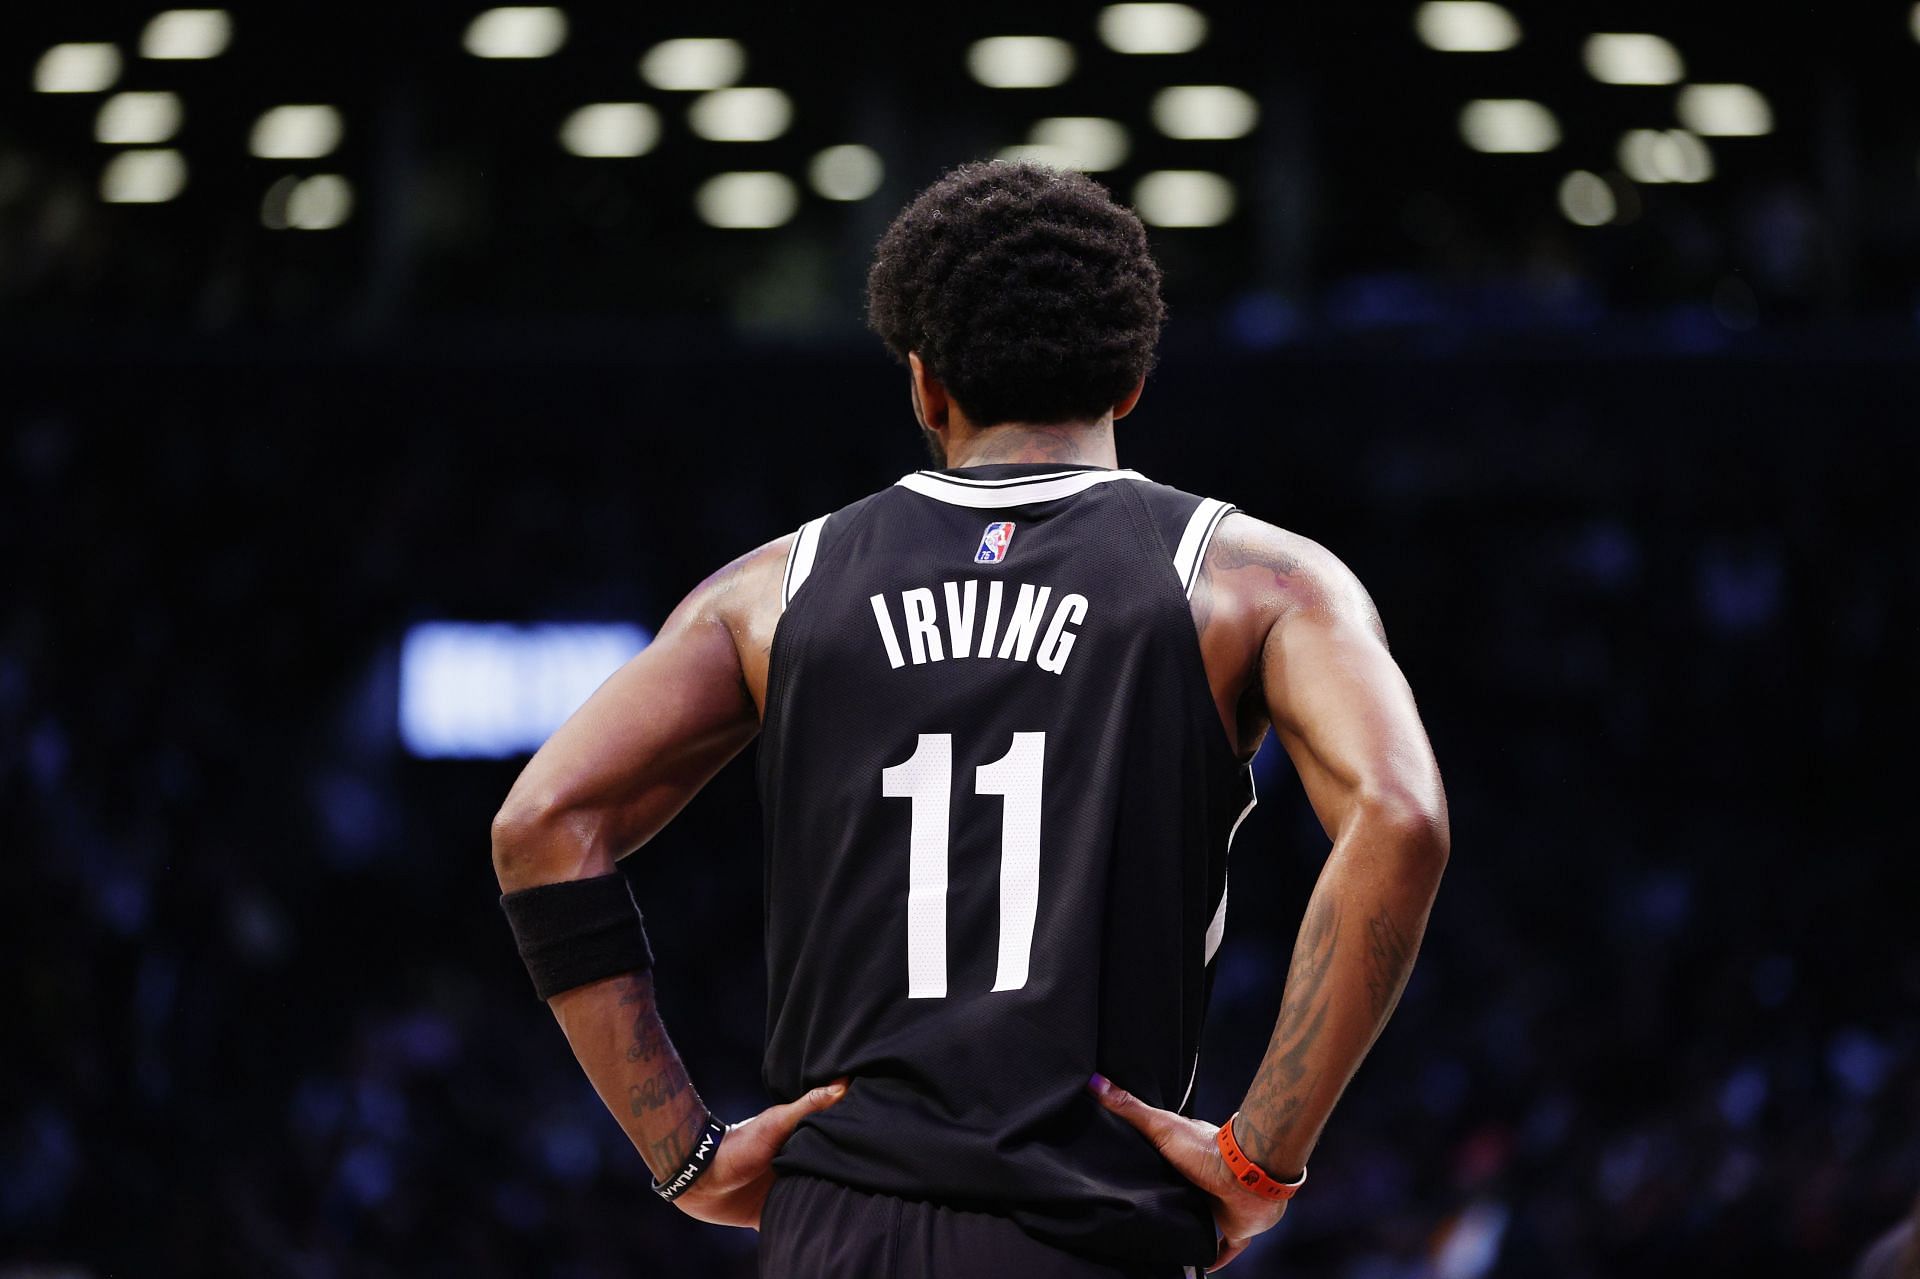 Owing to the New York vaccine mandate, Kyrie Irving could only play in road-games with the exception of Toronto. As a result, the Nets fell to the 7th seed.